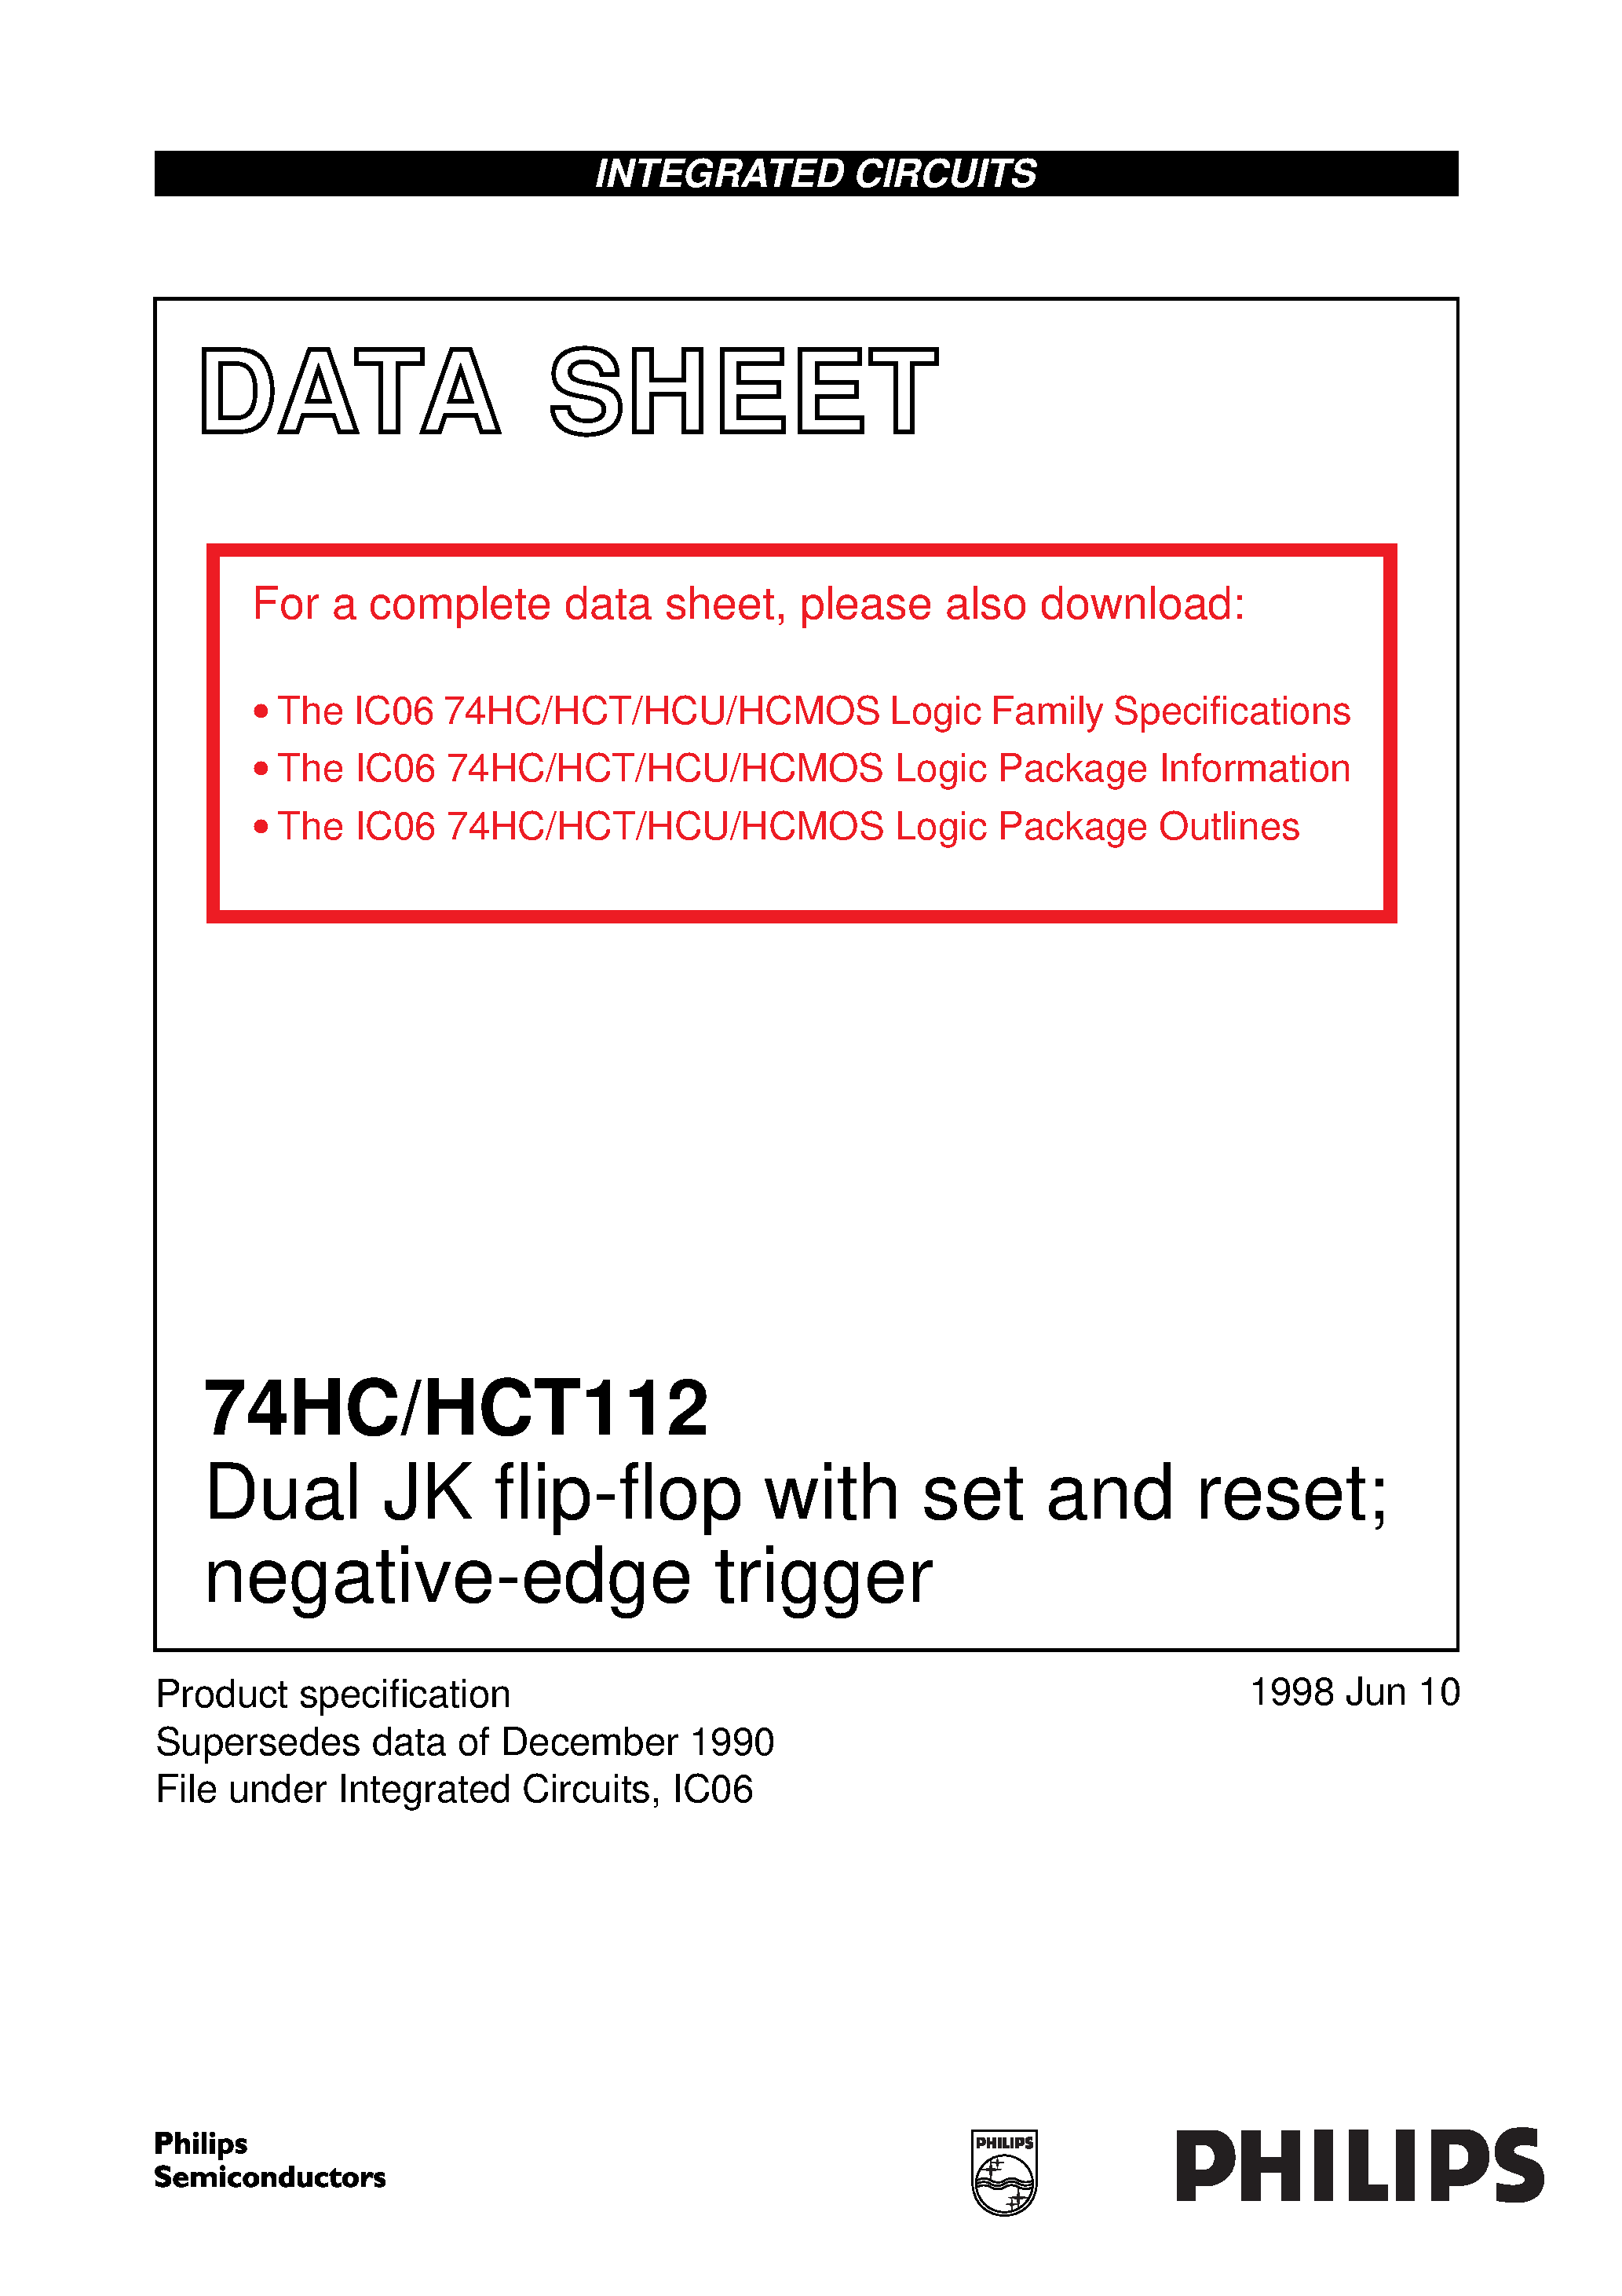 Datasheet 74HCT112 - Dual JK flip-flop with set and reset negative-edge trigger page 1